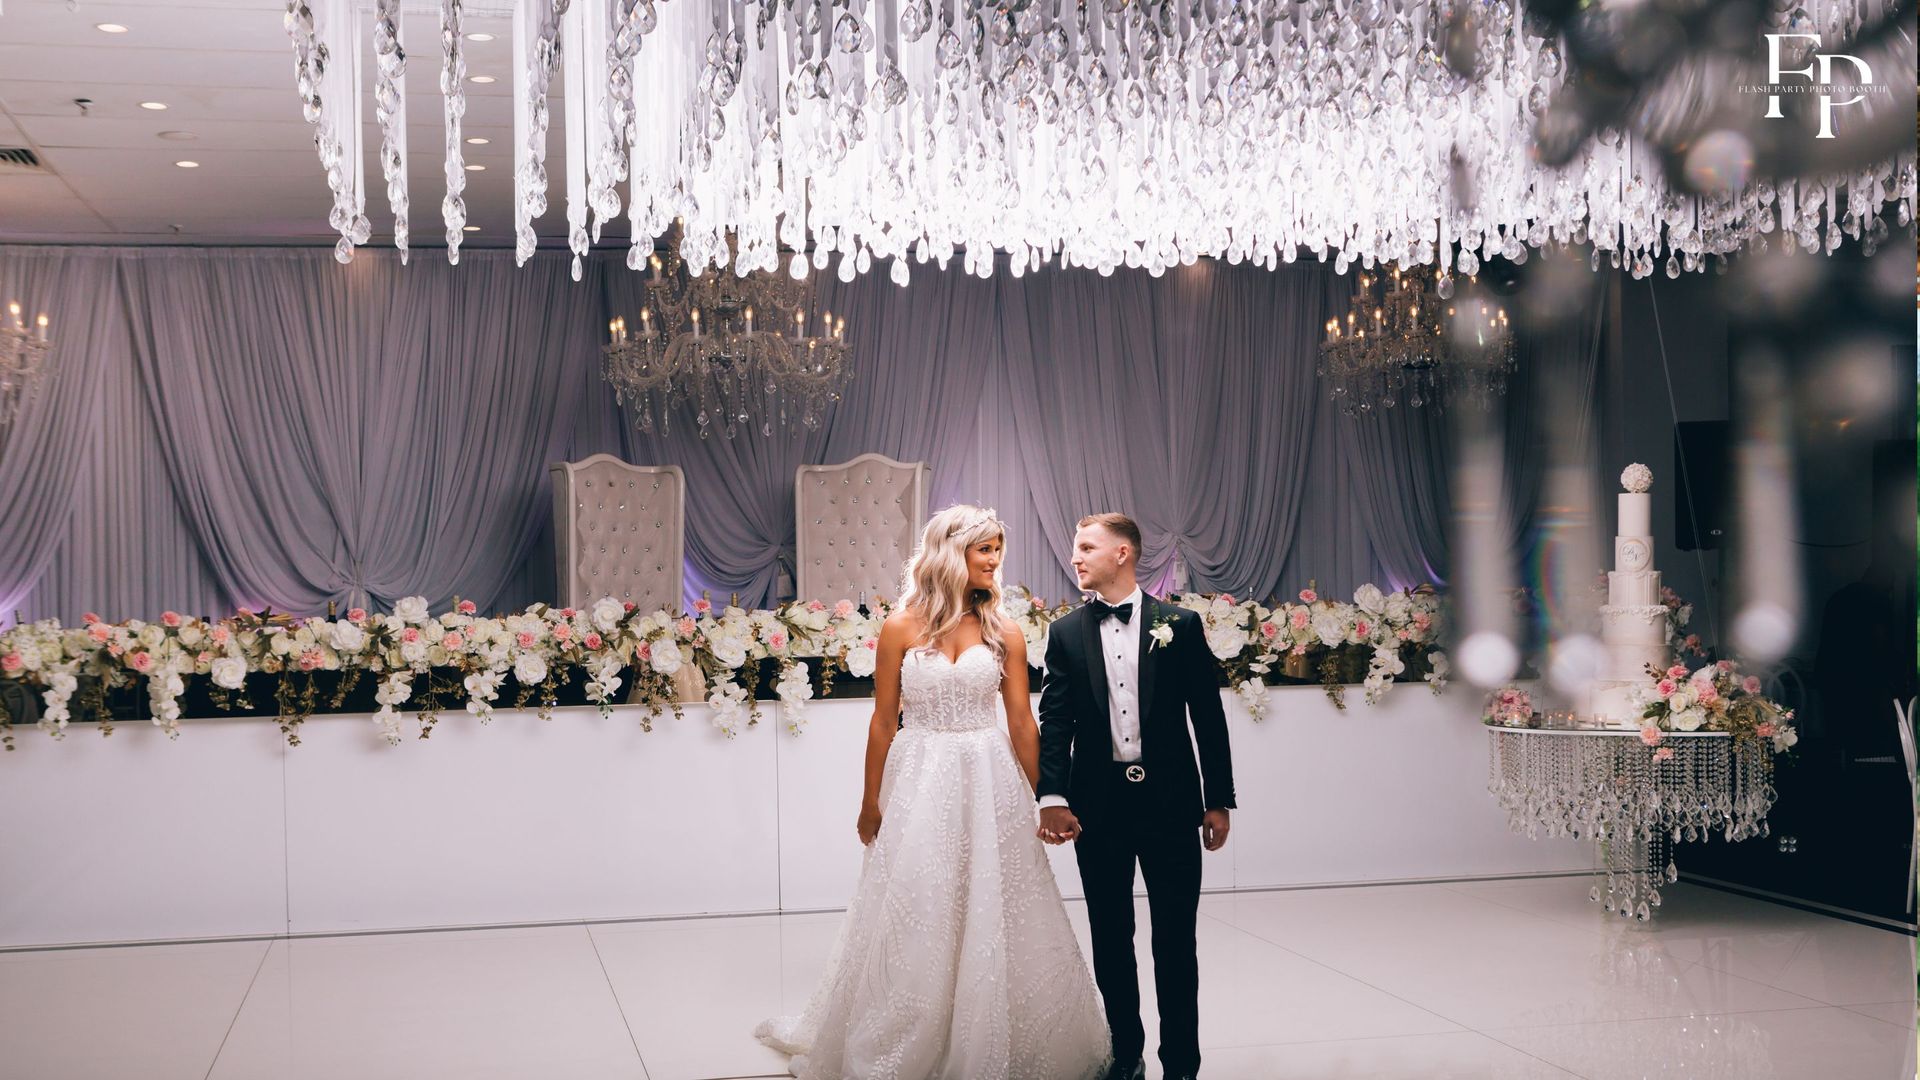 Surrounded by opulent elegance, the bride and groom stand at the center of the grand reception hall in DFW, their love radiating like a beacon of light amidst the festive atmosphere.